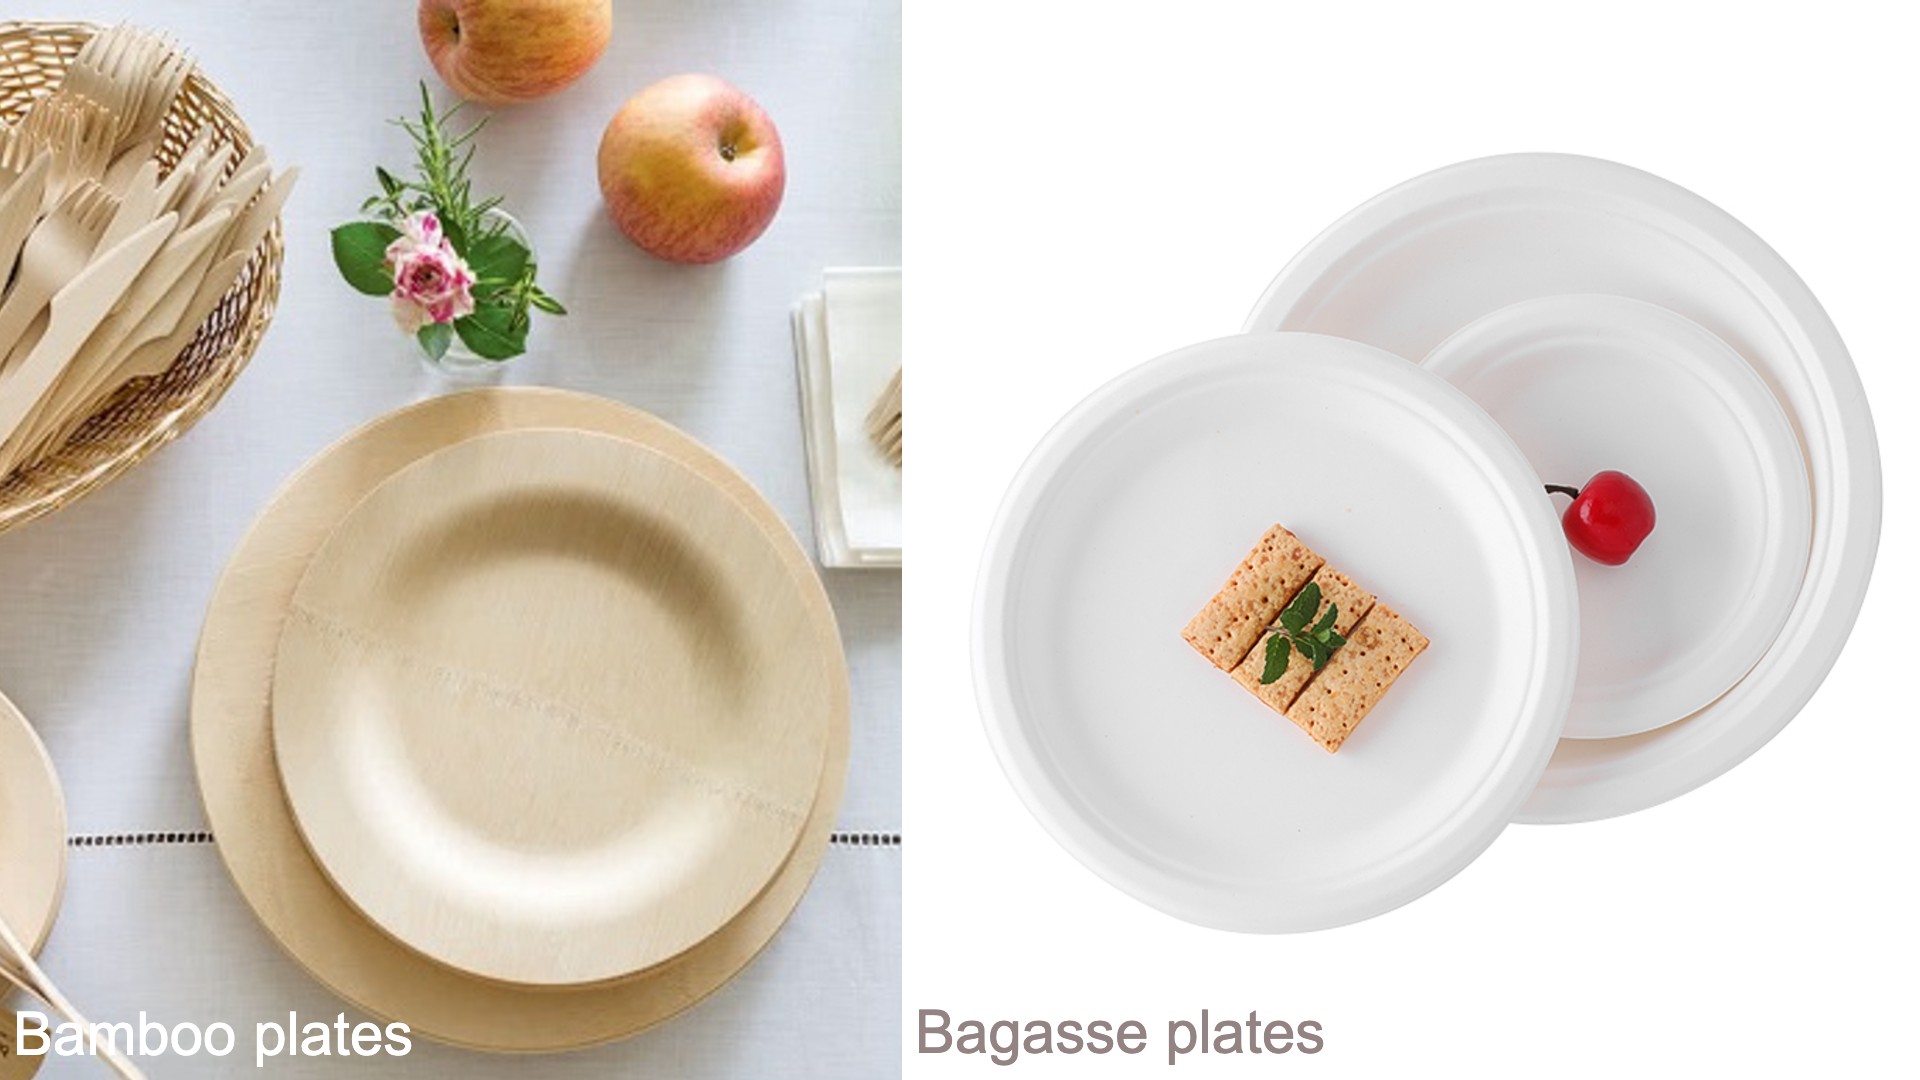 5 Reasons To Switch To Eco Friendly Disposable Plates